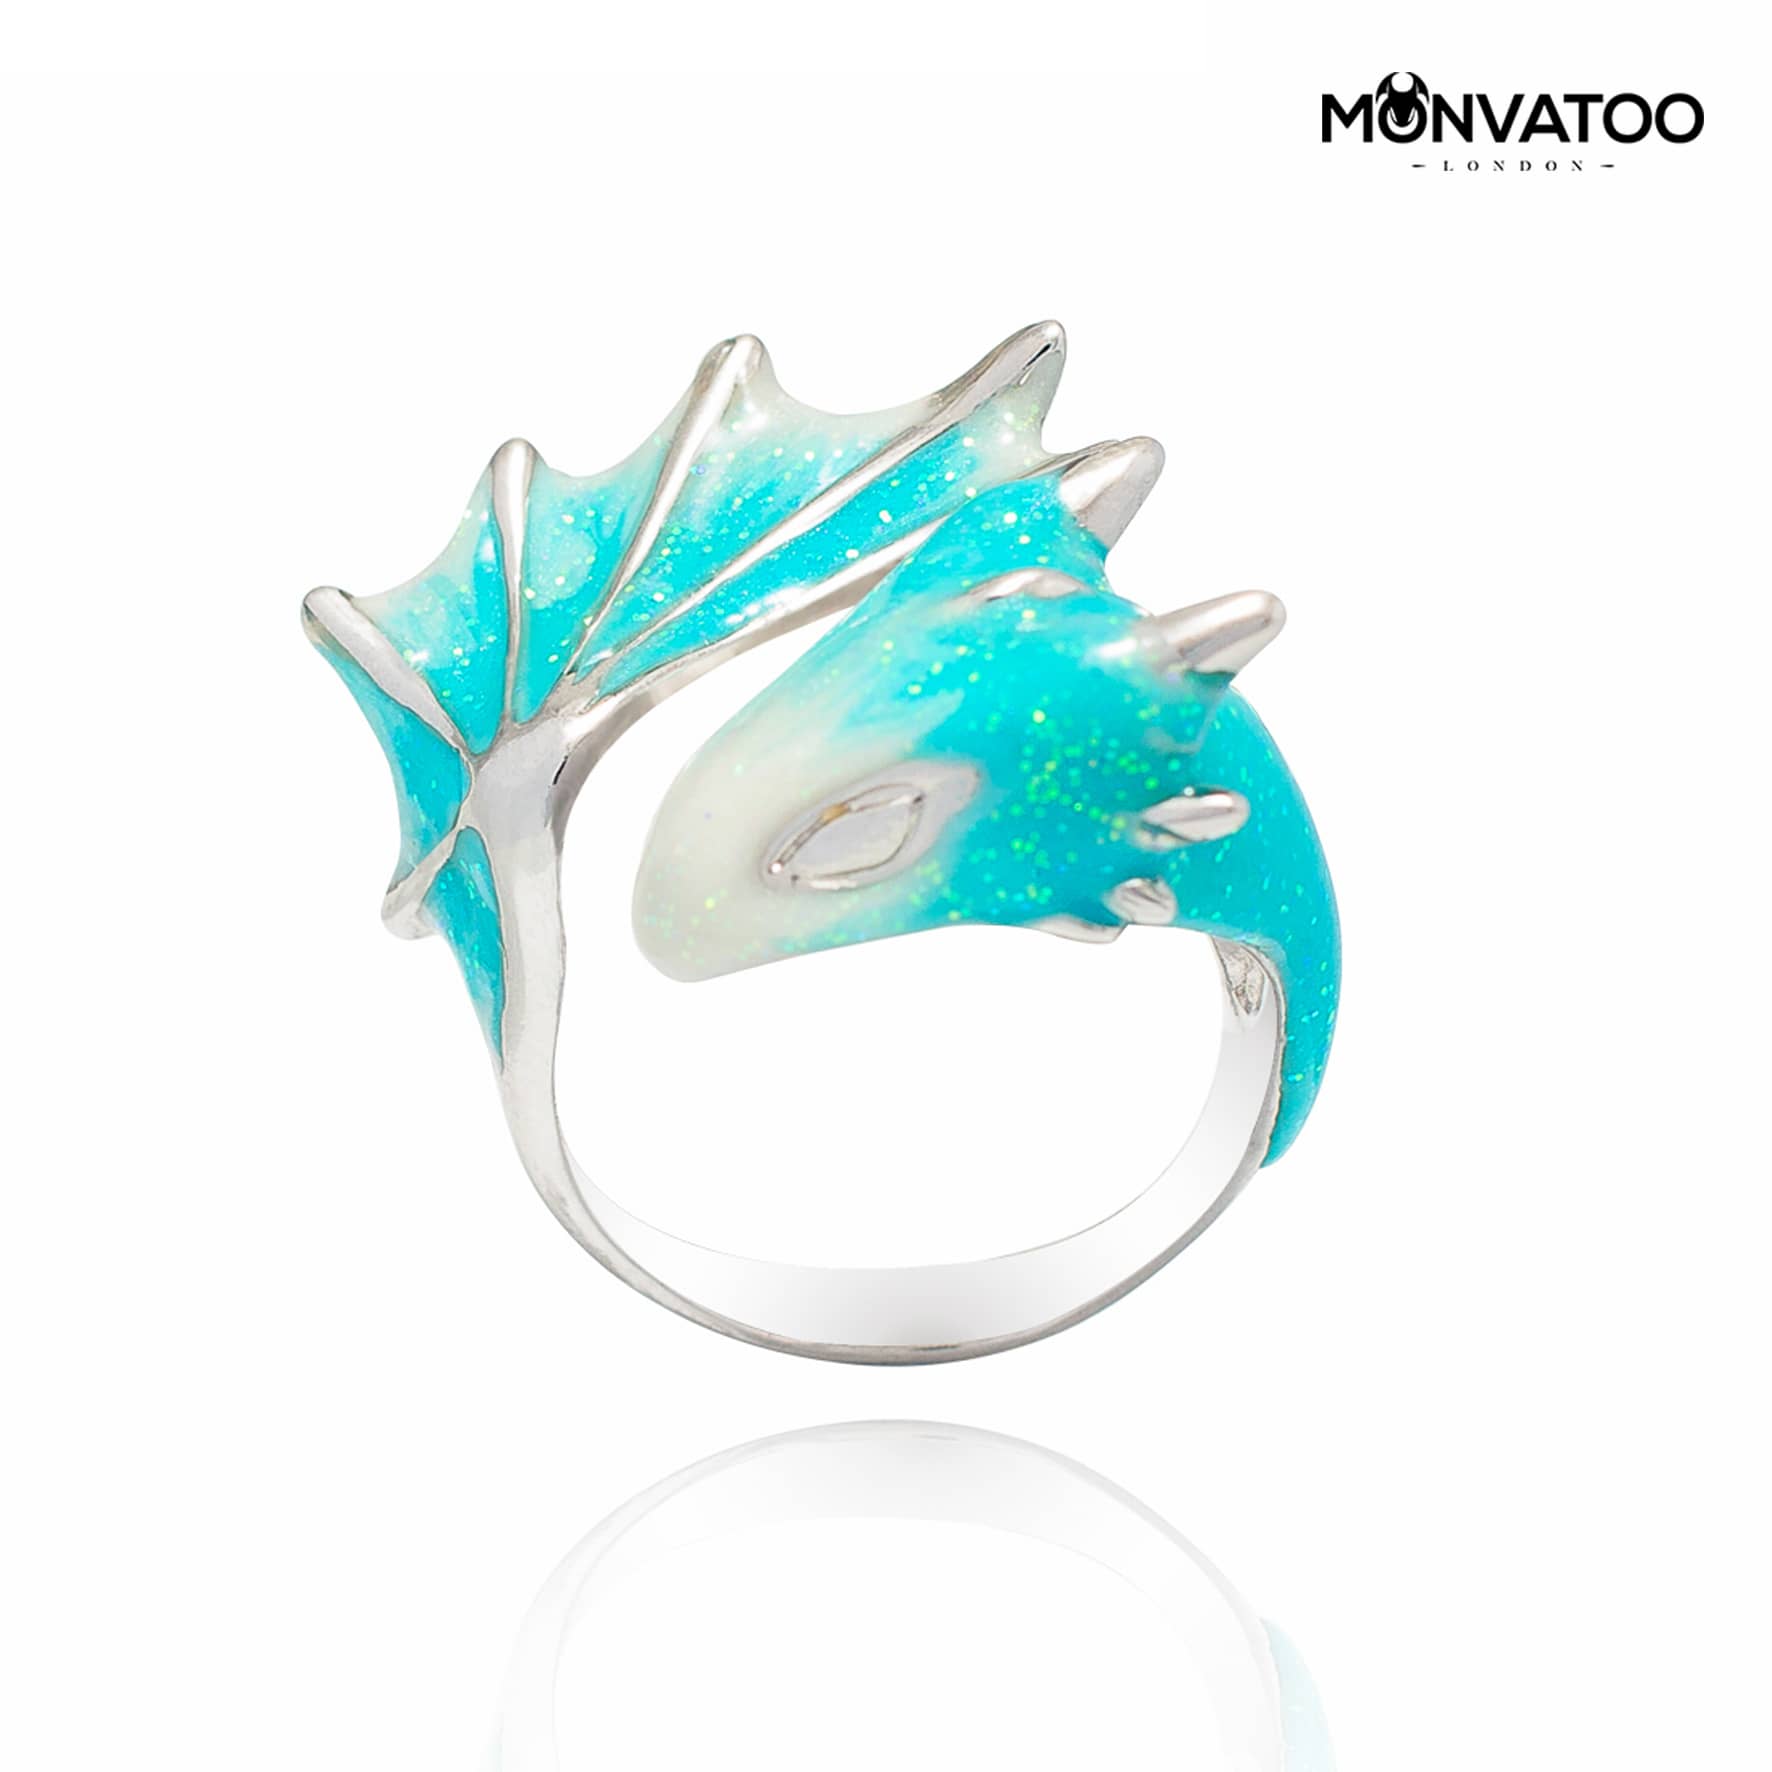 Silver turquoise dragon ring by MONVATOO London in a left side view - Adjustable band -Perfect for fantasy lover